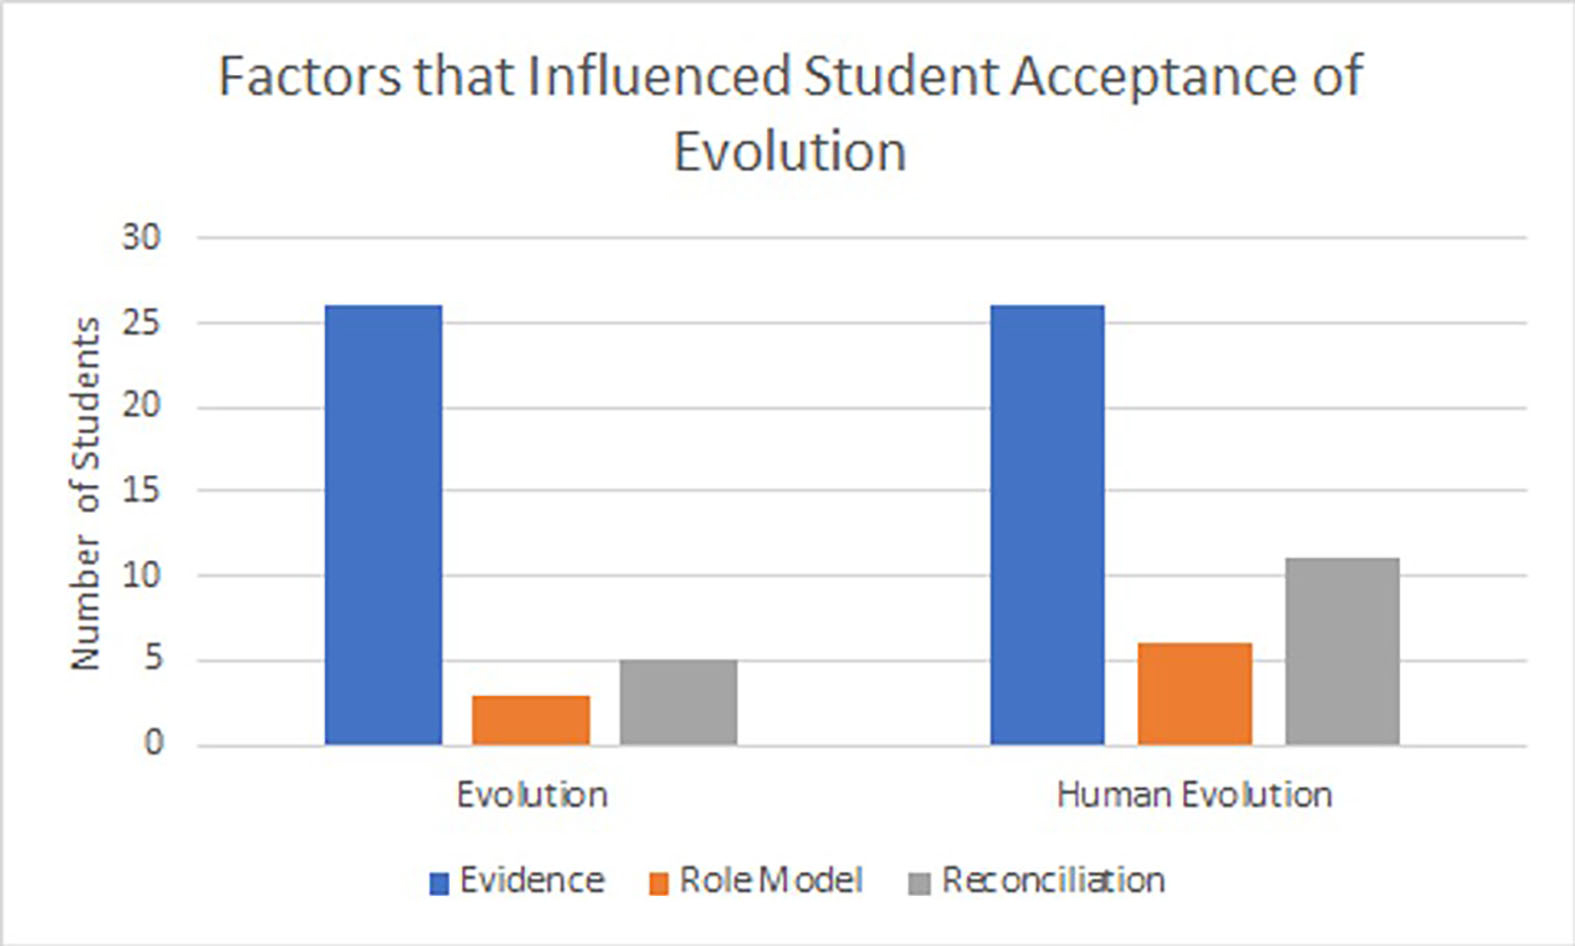 Factors that influence acceptance of evolution and human evolution during students’ college experience. For some students, acceptance was influenced by a combination of factors.